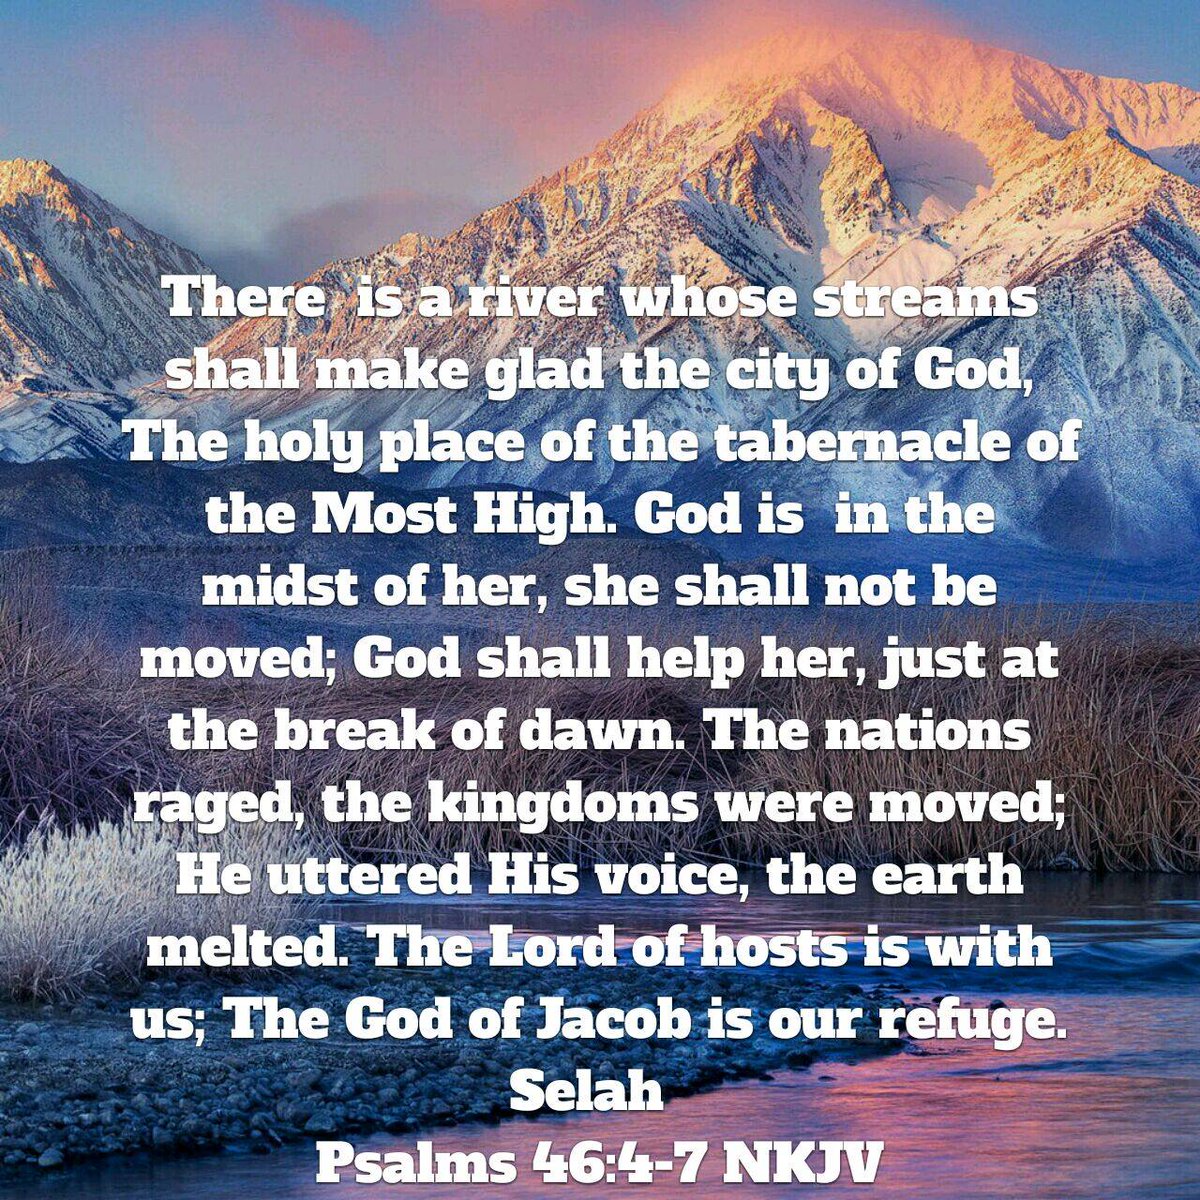 Psalms 46:4-7 NKJV [4] There is a river whose streams shall make glad the city of God, The holy place of the tabernacle of the Most High. [5] God is in the midst of her, she shall not be moved; God shall help her, just at the break of dawn. [6] The nations raged, the kingdom